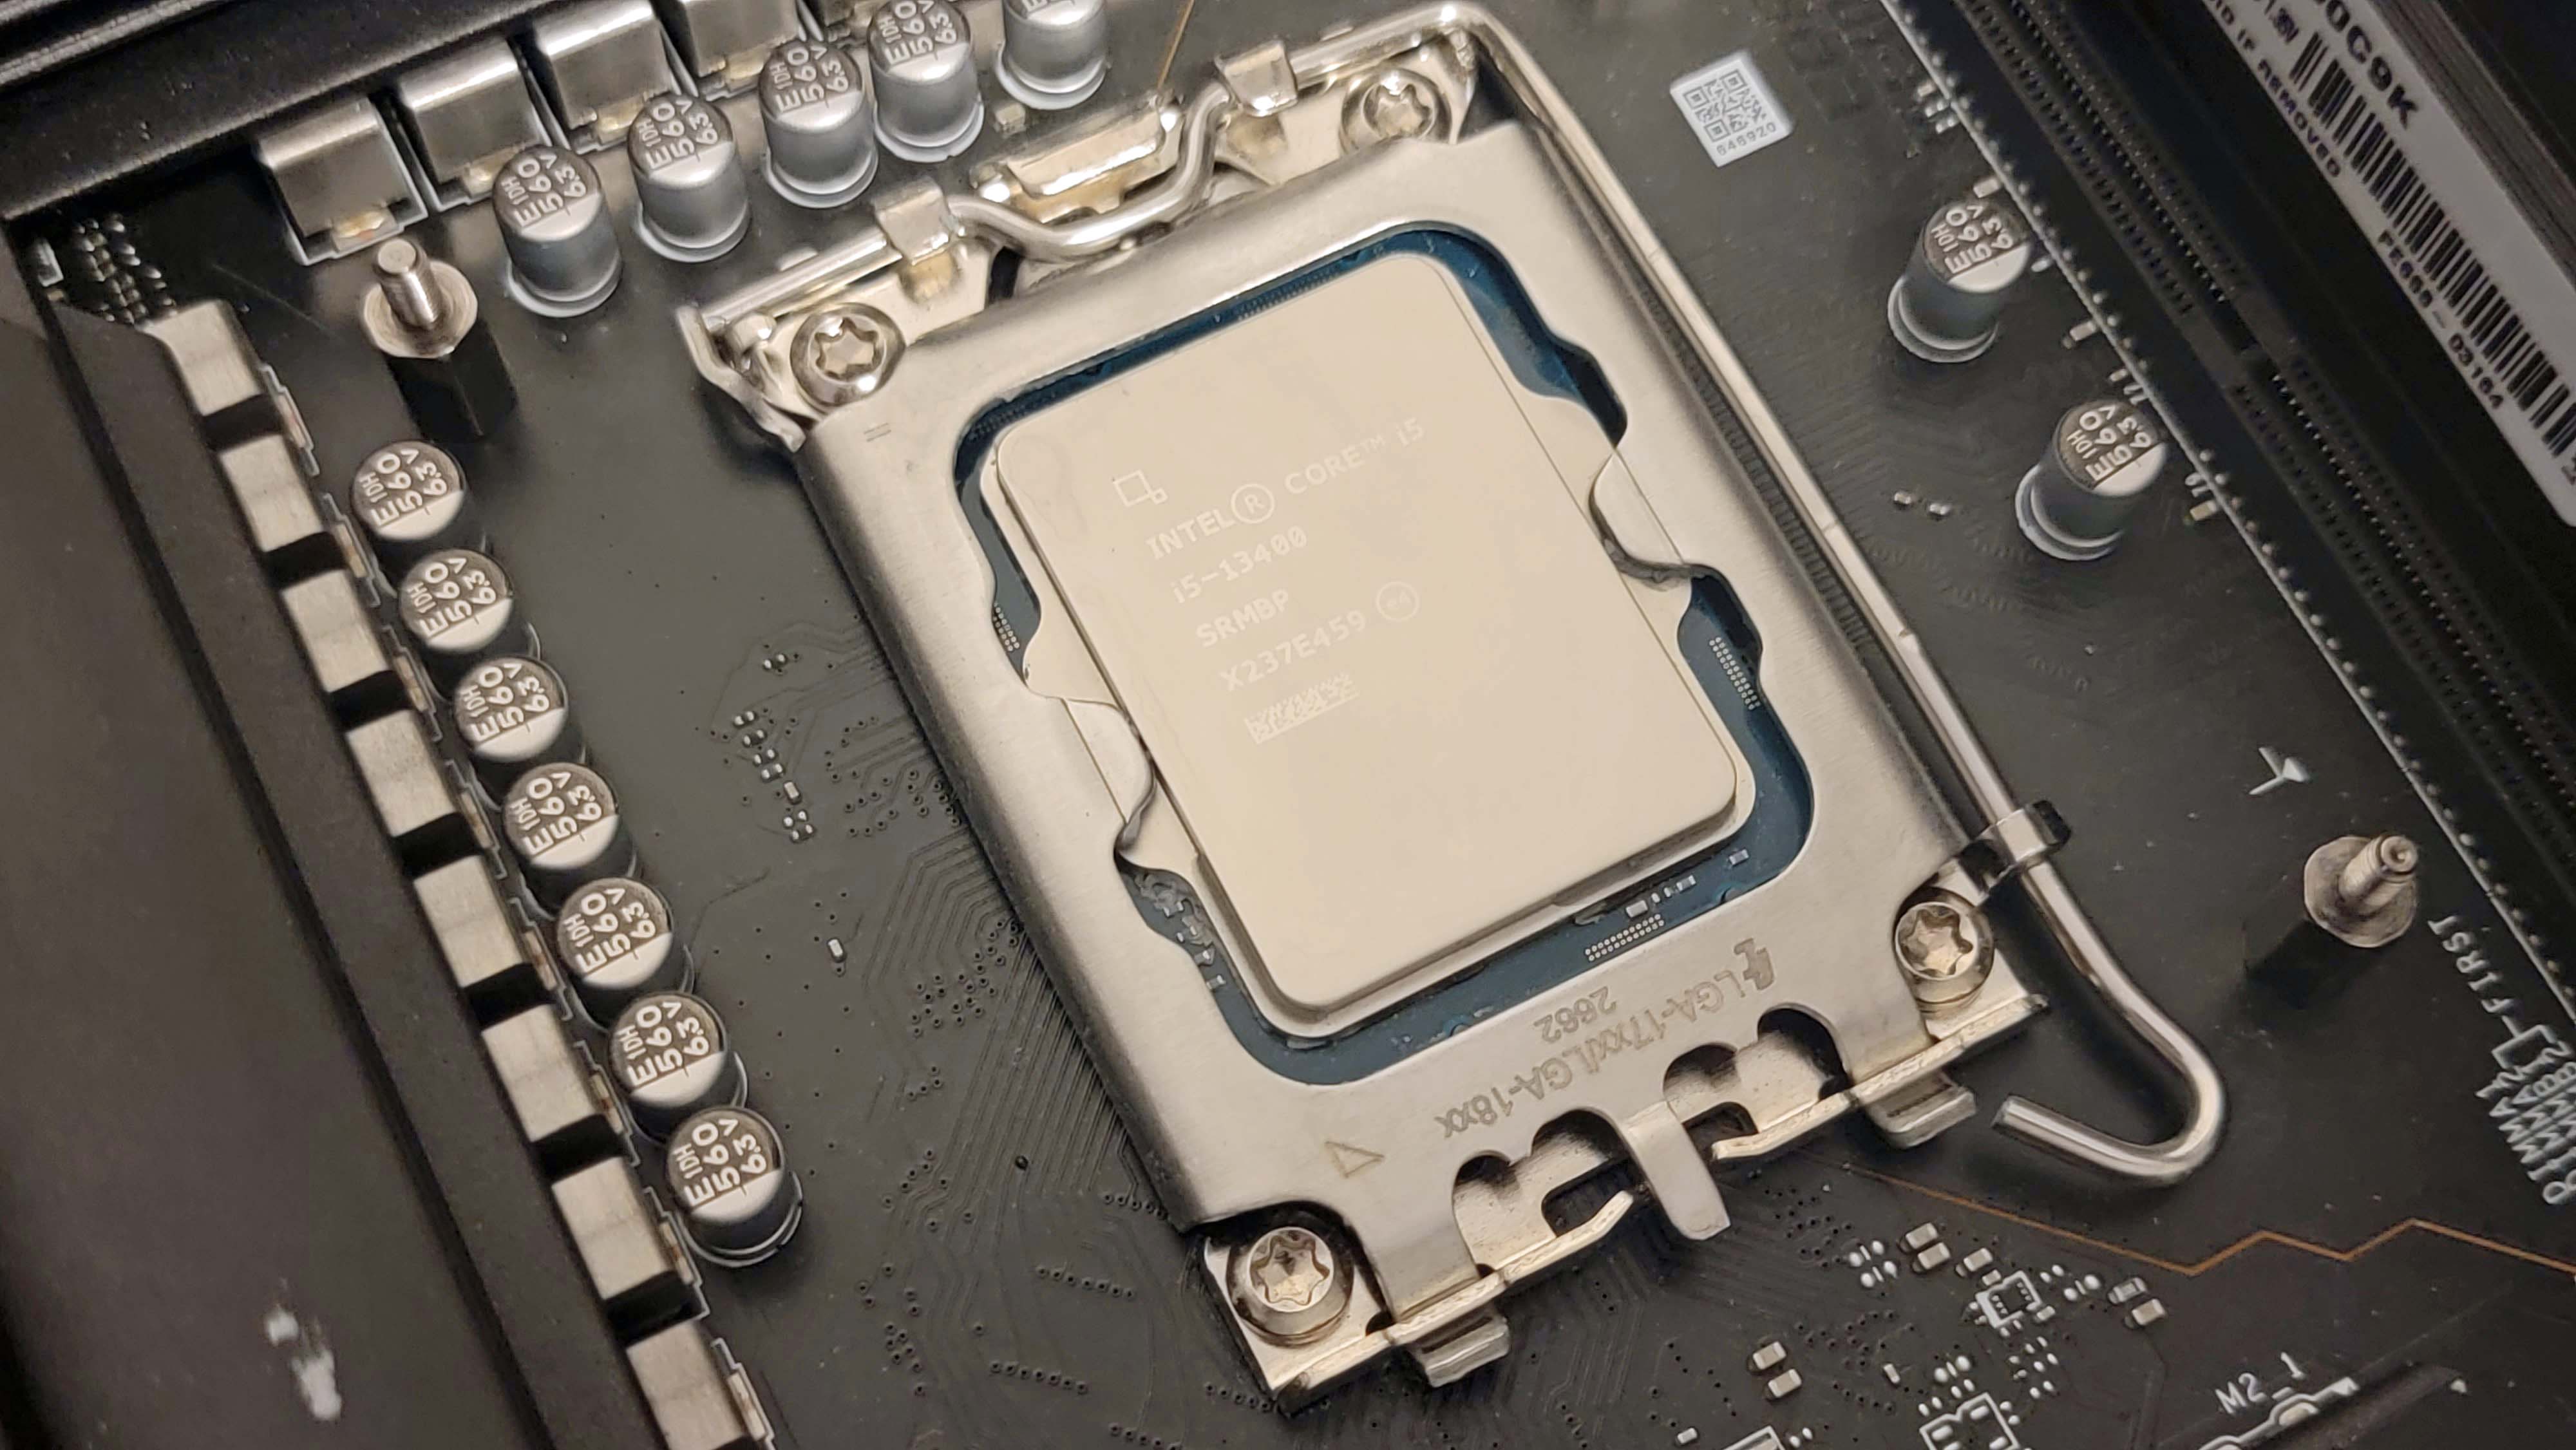 Intel Core i5-13400 Review: Leading Value Gaming at $200